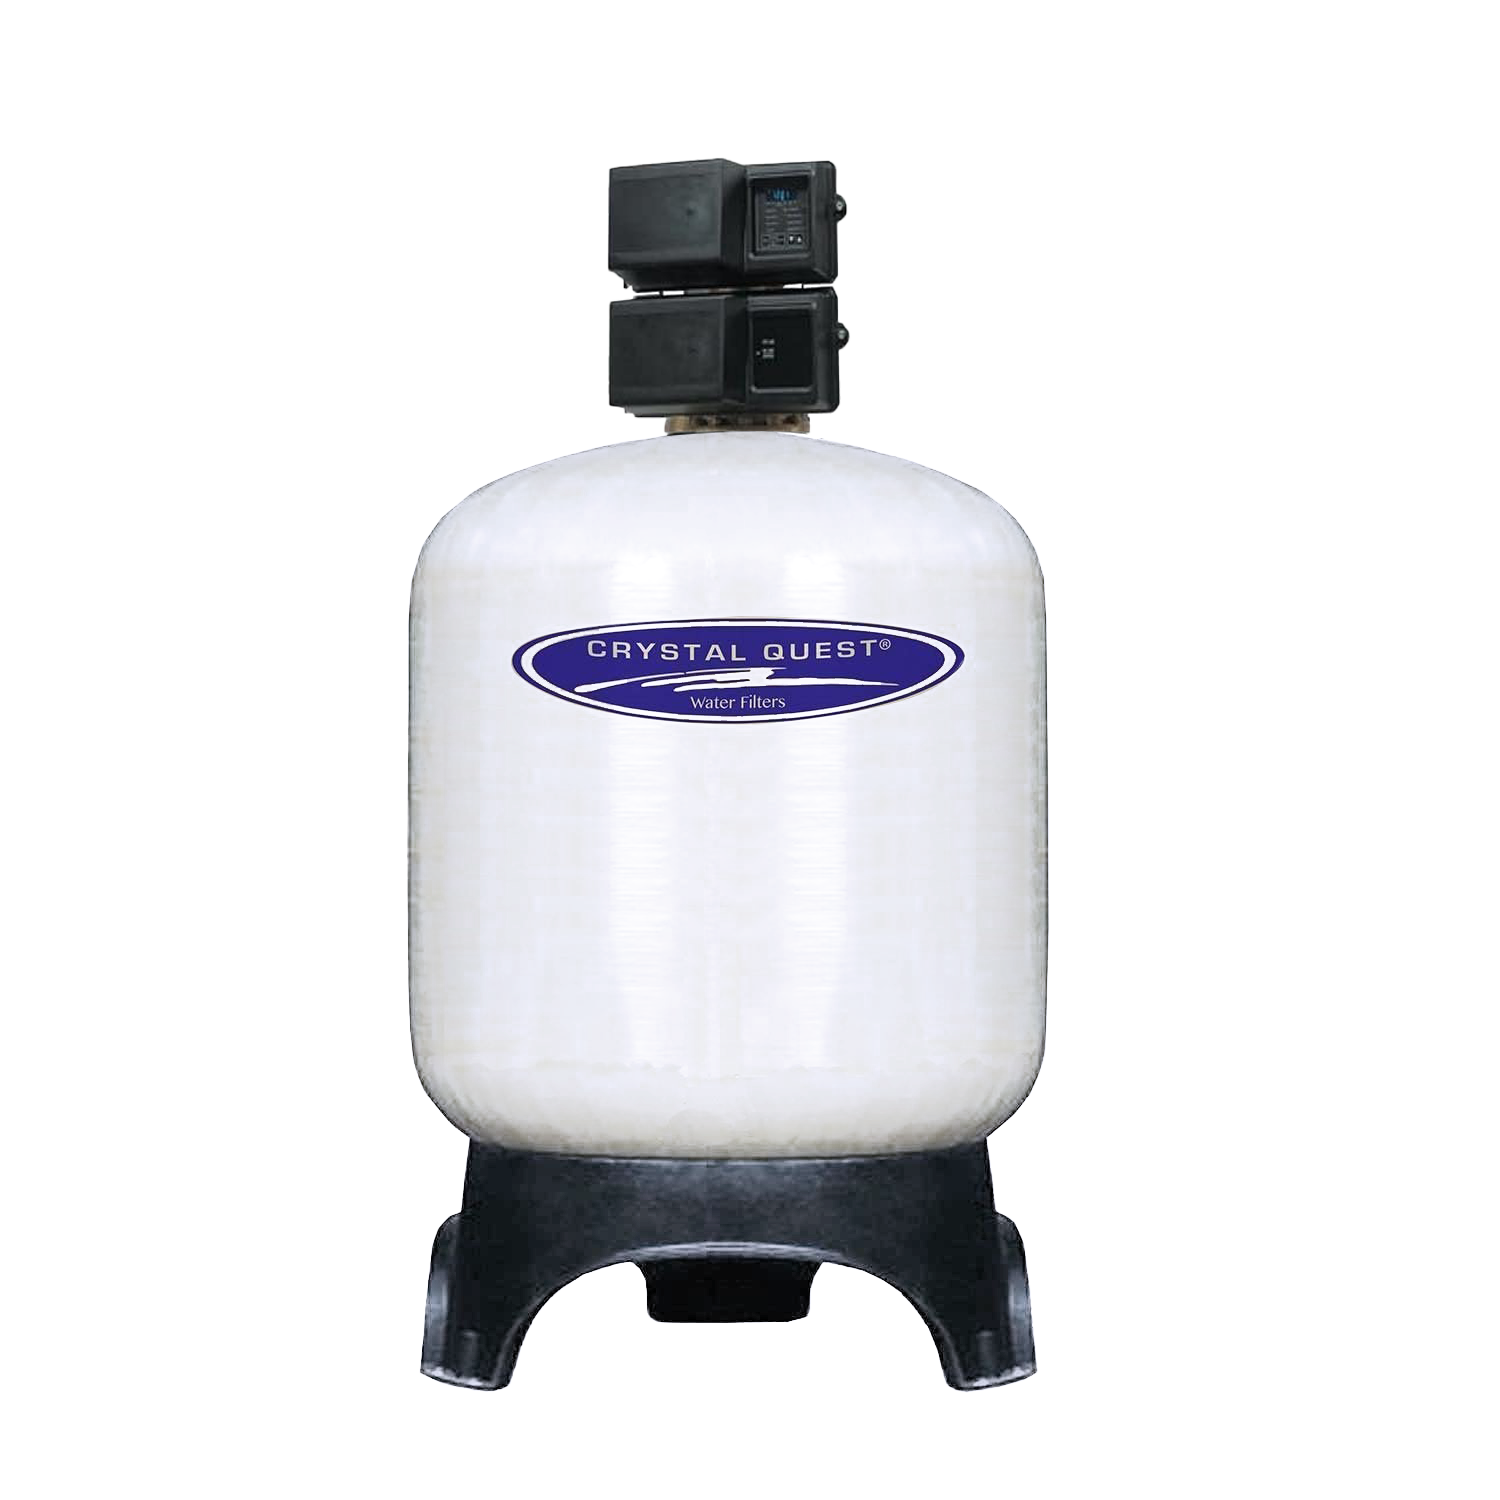 205 GPM / Calcium GAC / Automatic Fluoride Removal Water Filtration System - Commercial - Crystal Quest